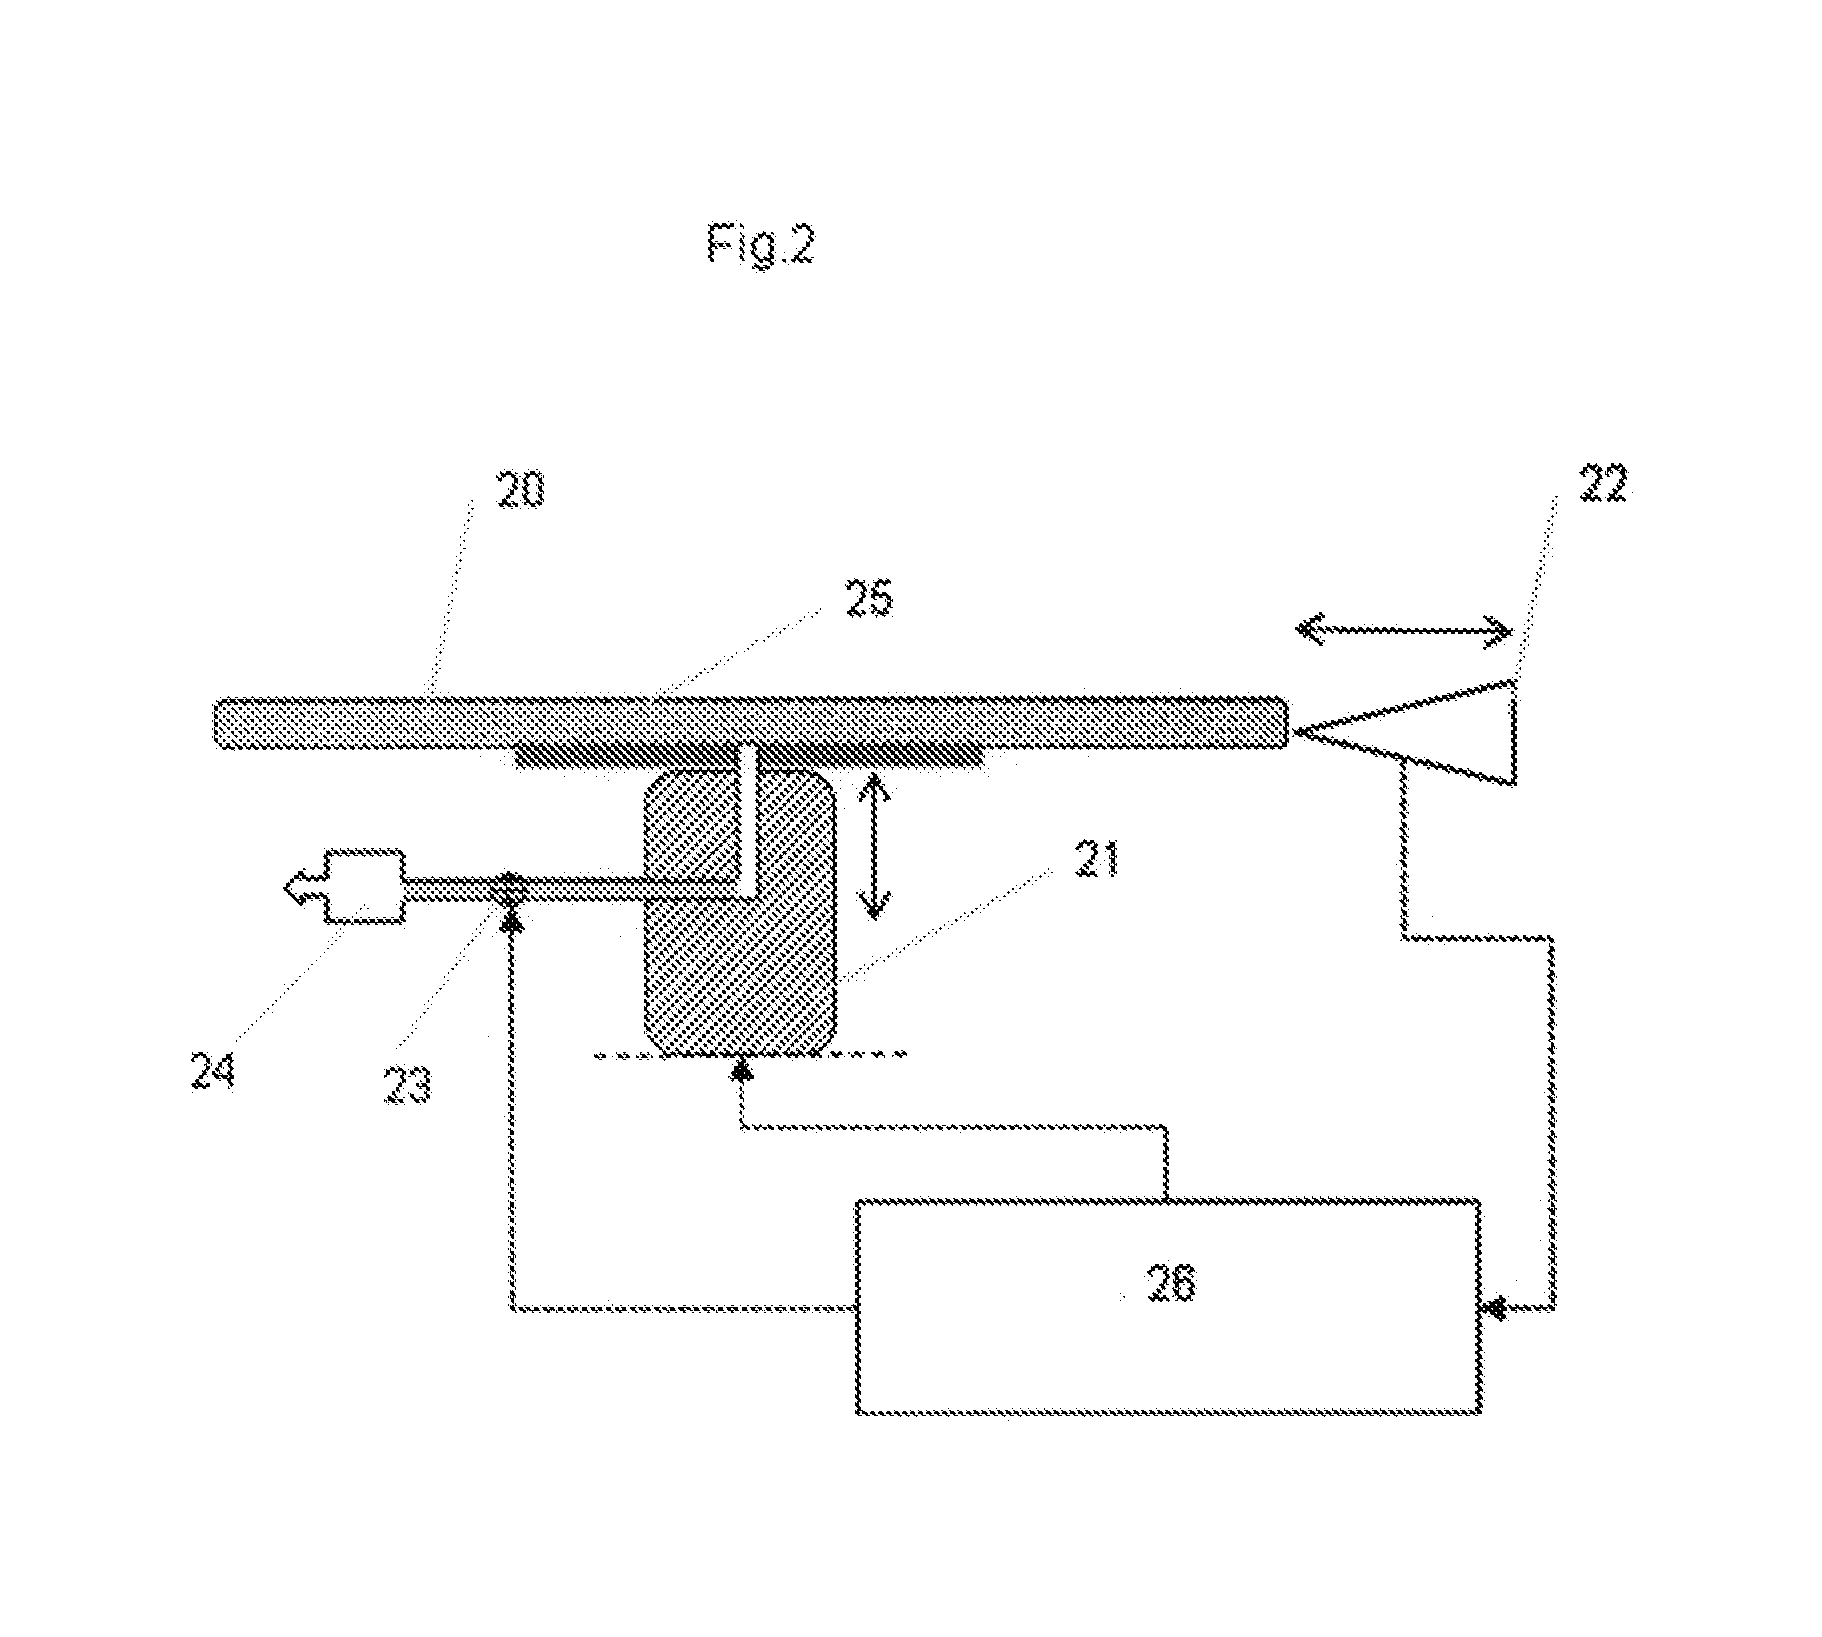 Method and apparatus for detecting cracks and delamination in composite materials